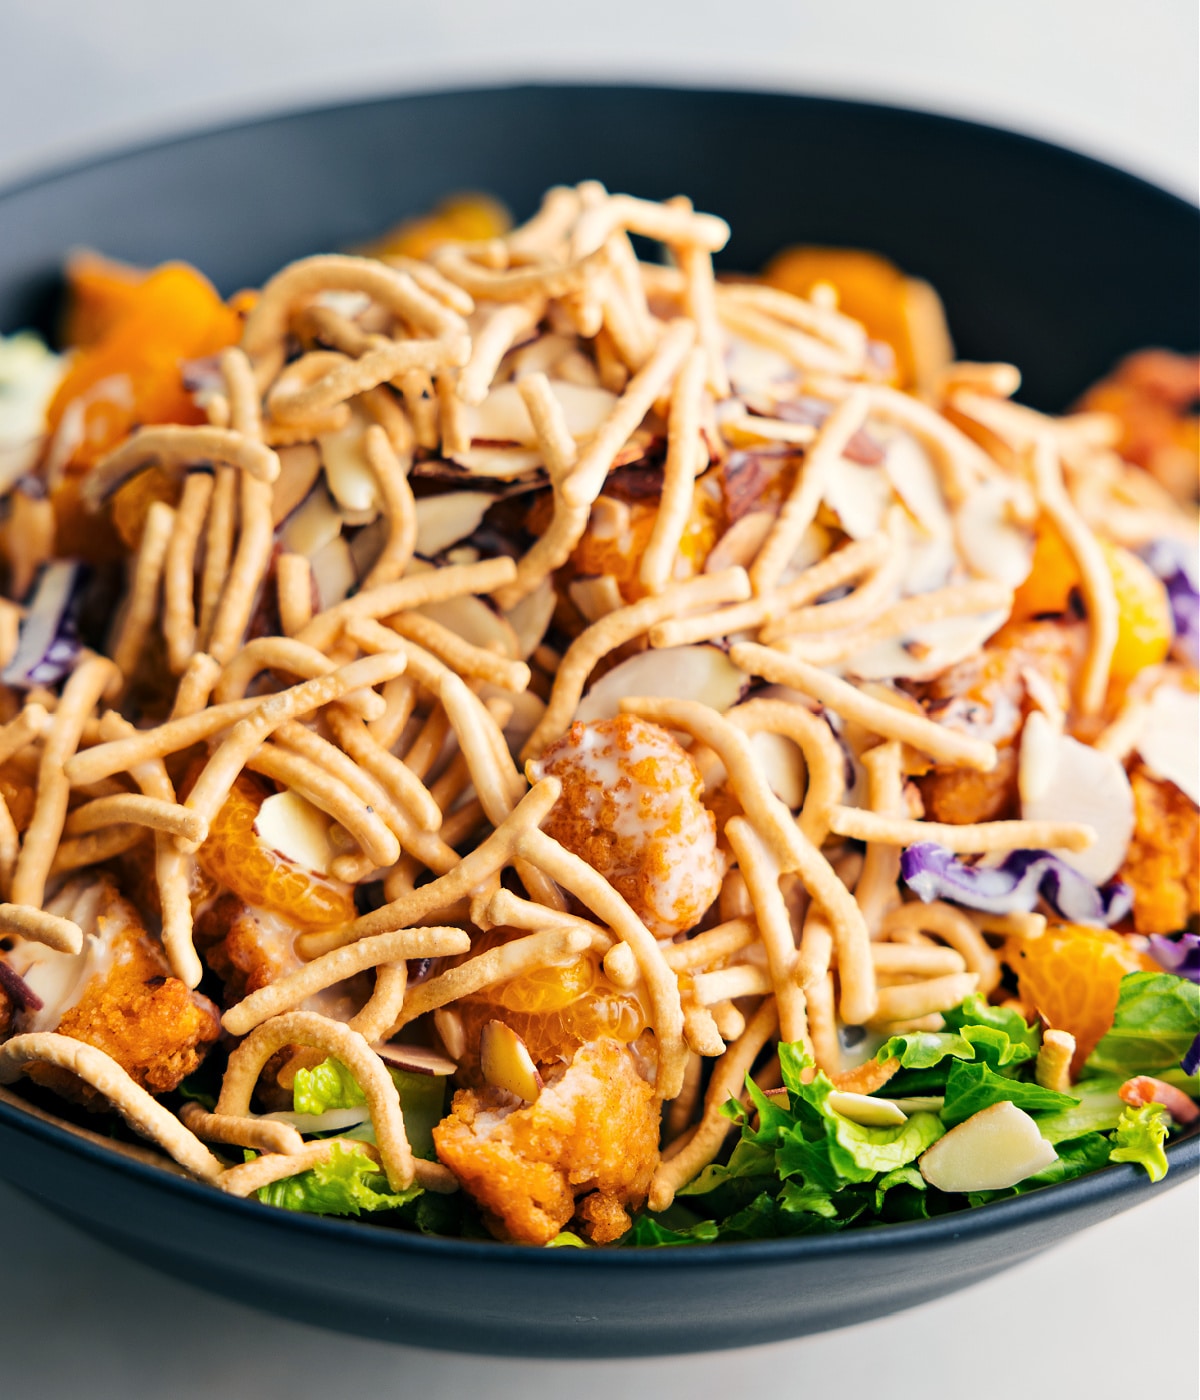 The dish tossed together in a bowl showing the crispy chow mein noodles.